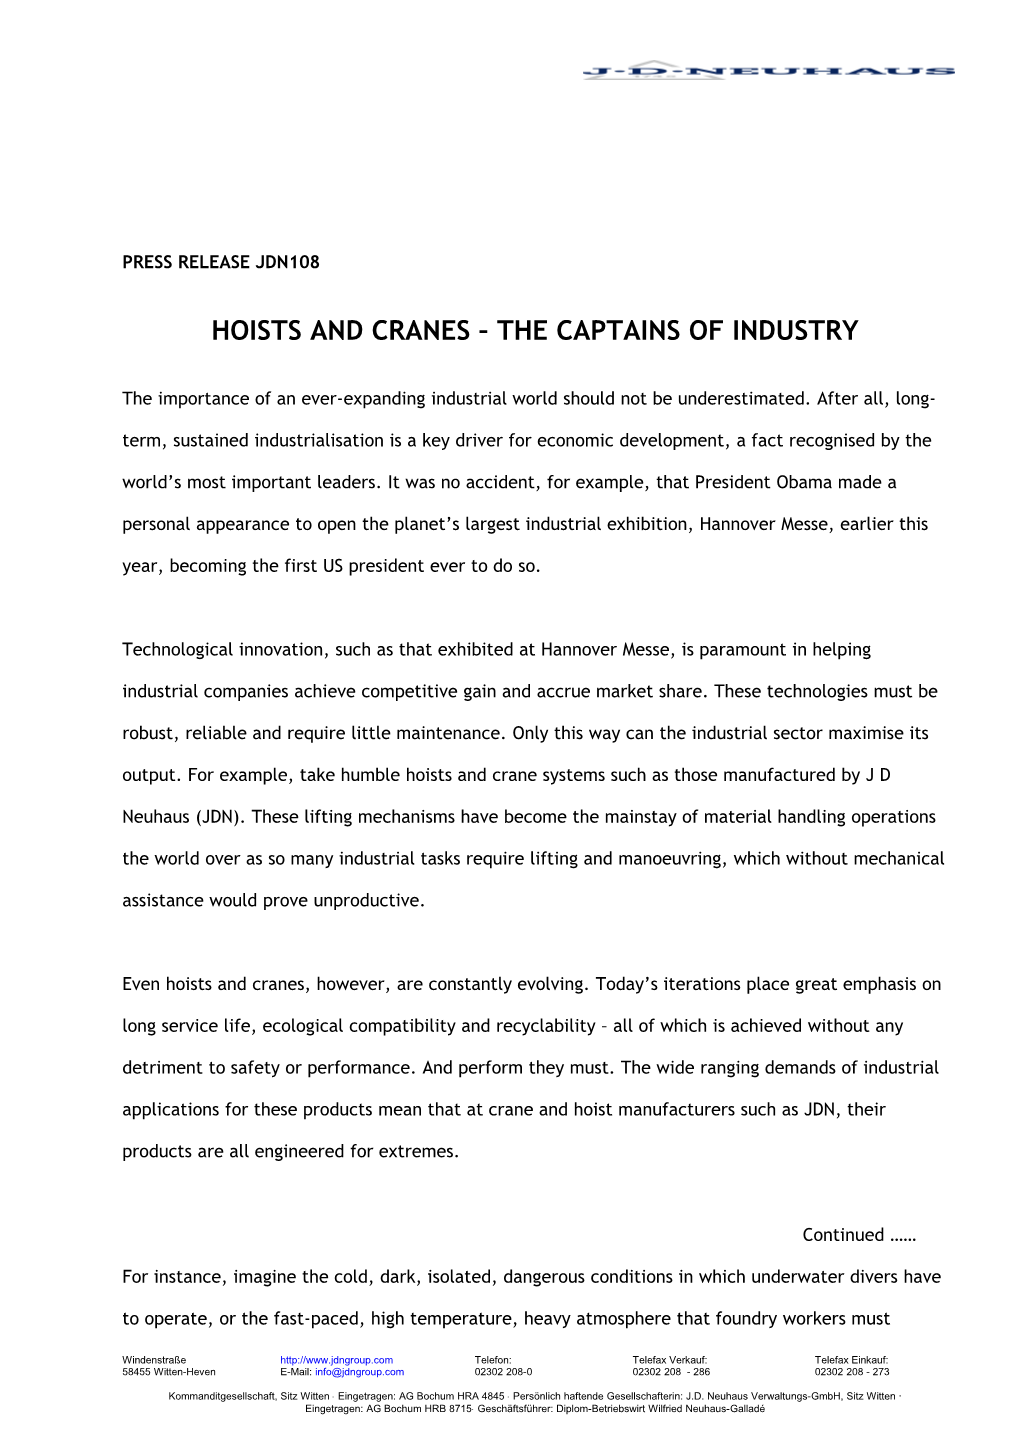 Hoists and Cranes - the Captains of Industry